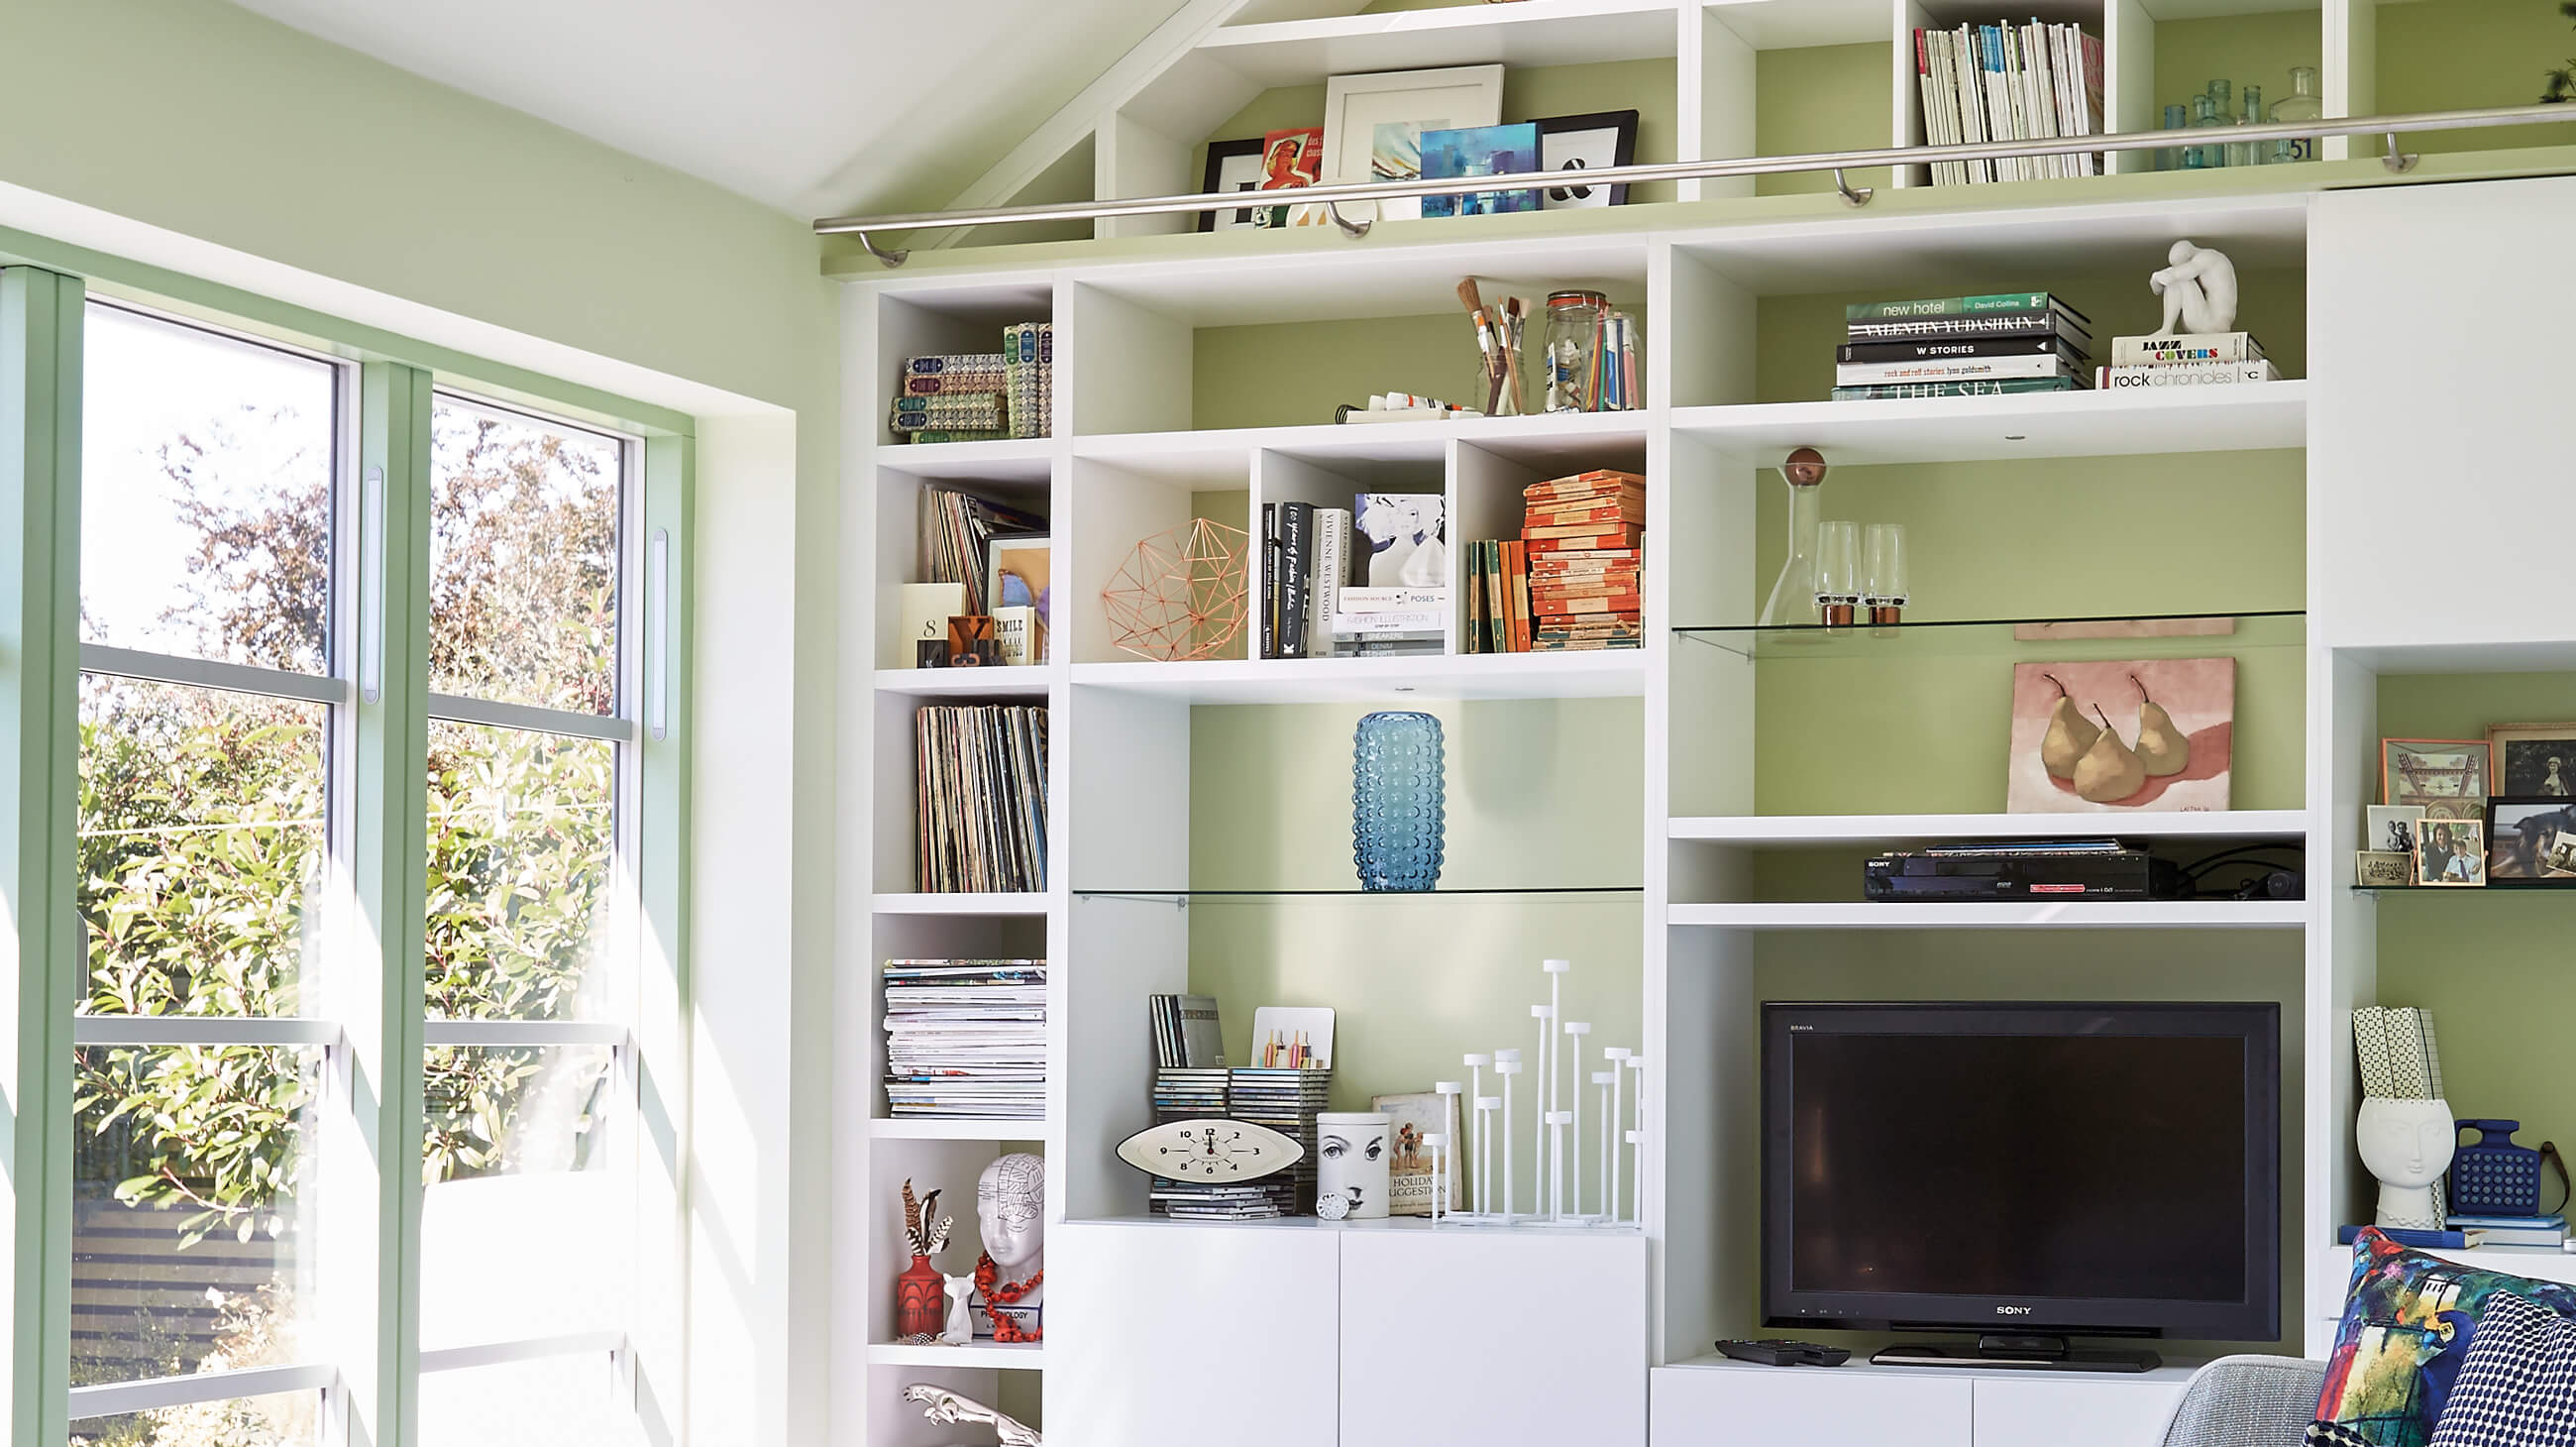 Storage Solutions for Small Spaces